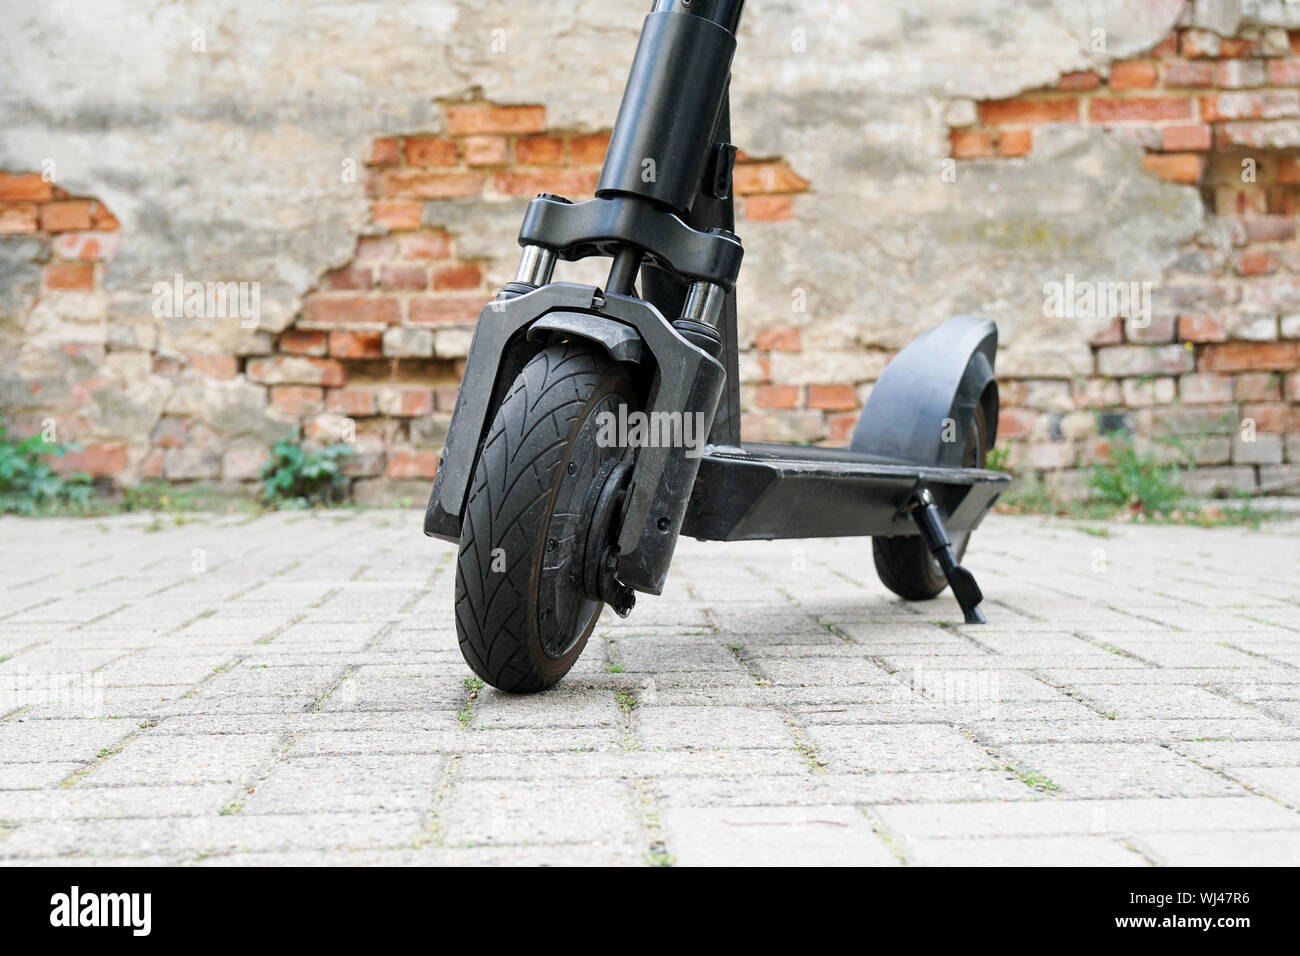 Electric kick scooter or e-scooter parked on pavement - e-mobility or micro-mobility trend Stock Photo